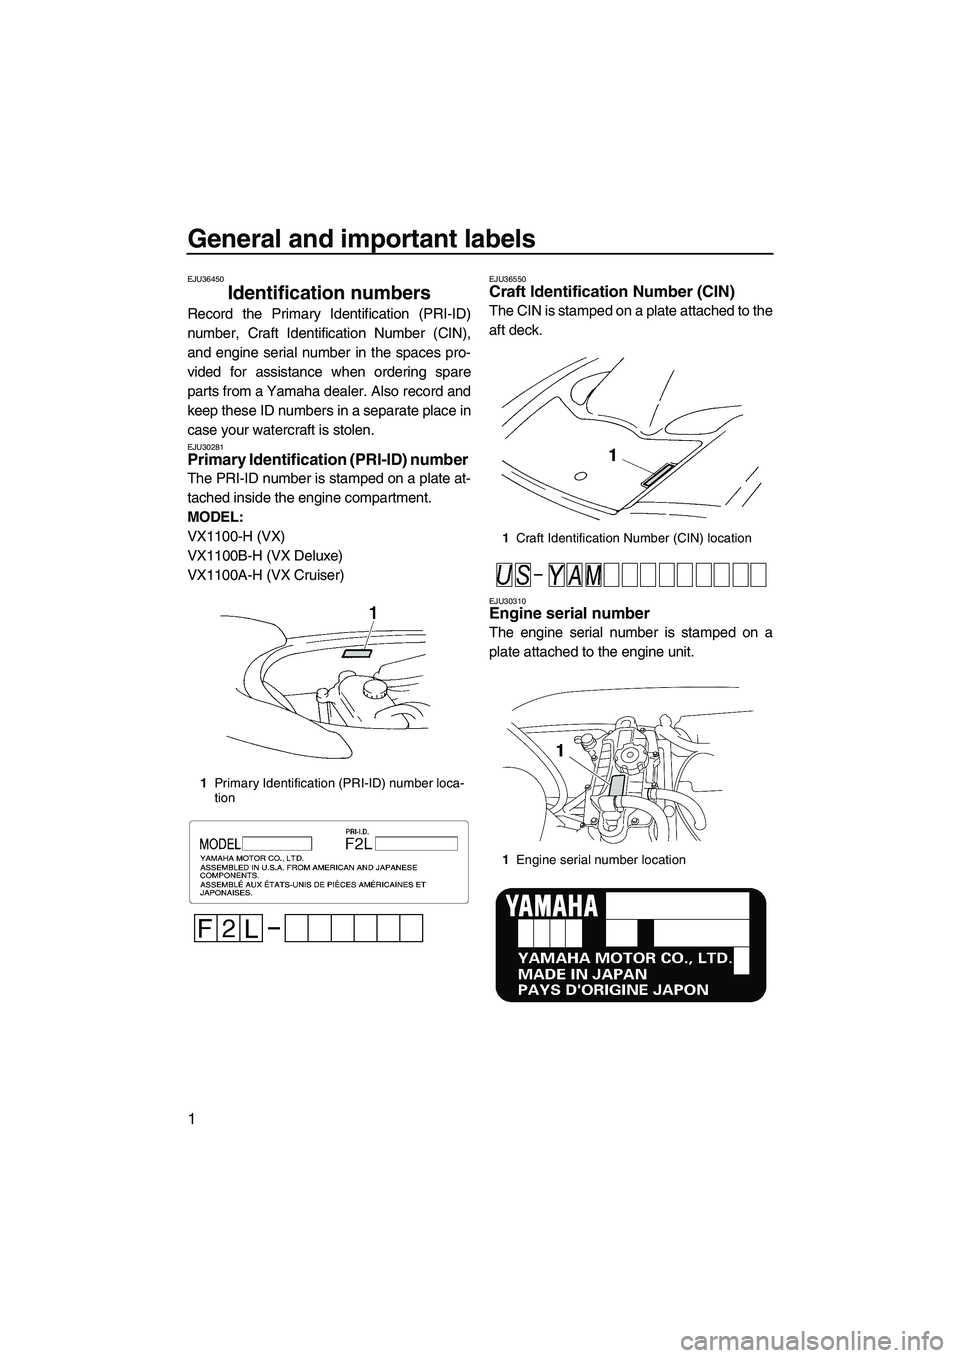 YAMAHA VX 2009  Owners Manual General and important labels
1
EJU36450
Identification numbers 
Record the Primary Identification (PRI-ID)
number, Craft Identification Number (CIN),
and engine serial number in the spaces pro-
vided 